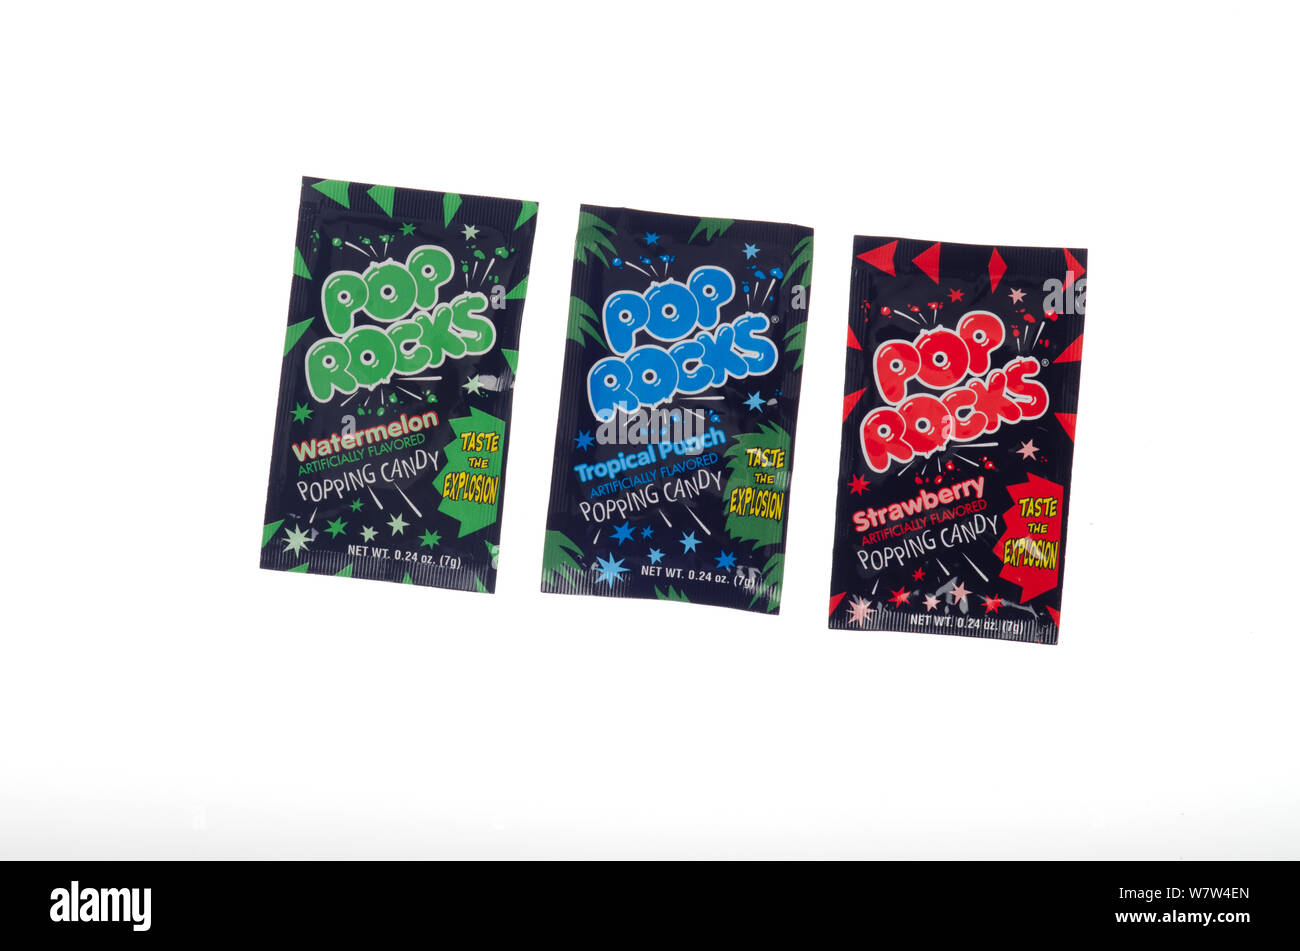 Pop Rocks candy packets Stock Photo